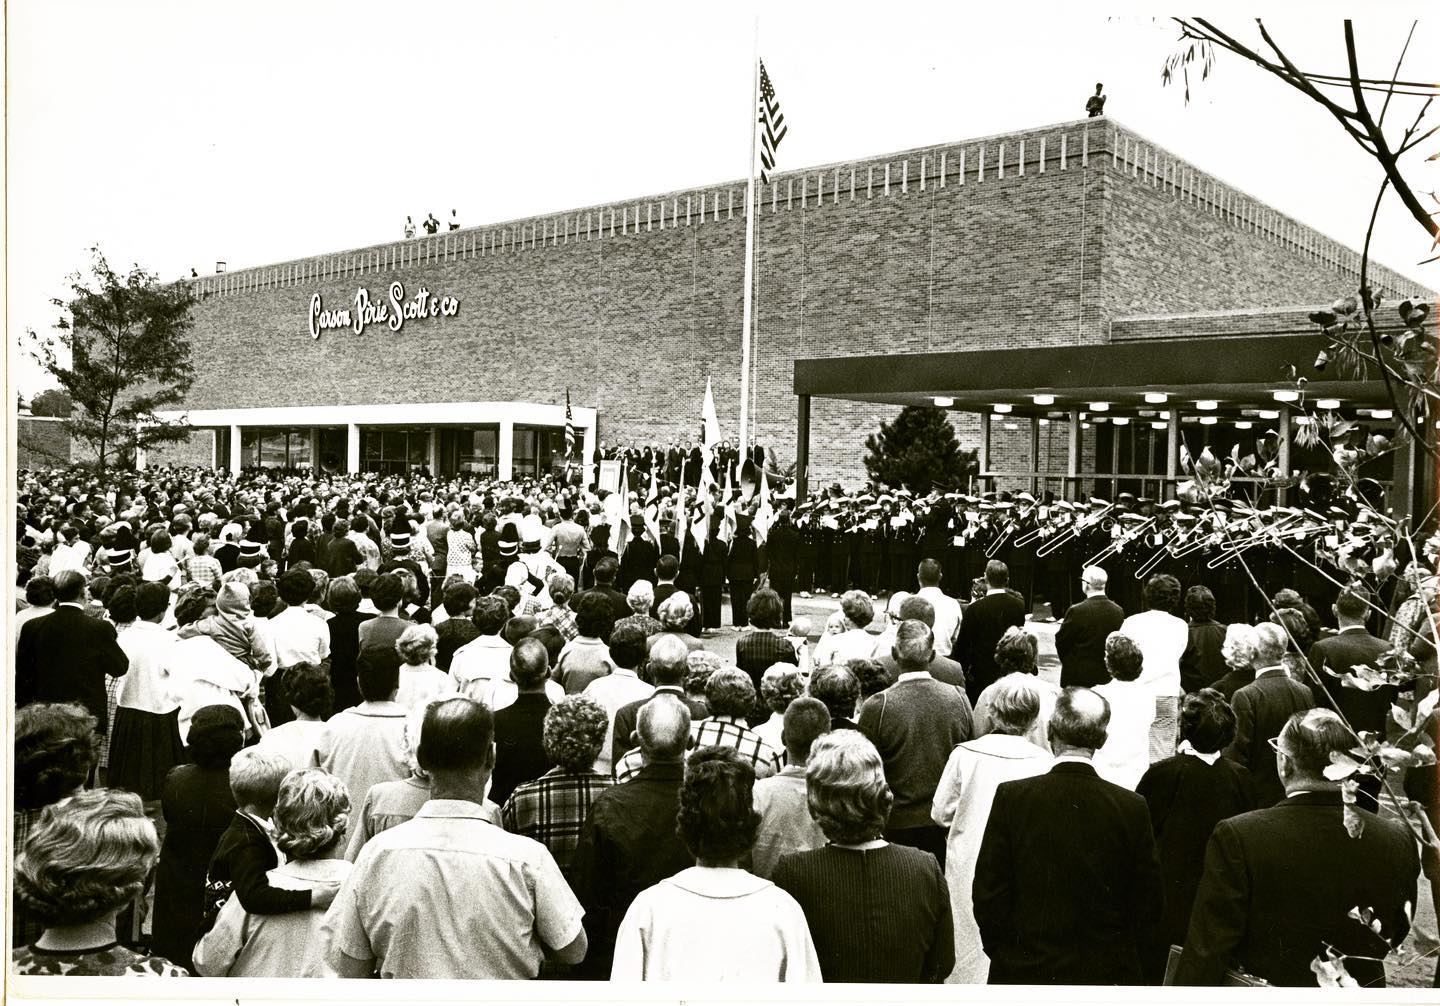 A black and white picture of the opening day of Lincoln Square Mall. Hundreds of people are gathered in front of the entrance and on the right side is a band wearing dark uniforms with white sashes. 